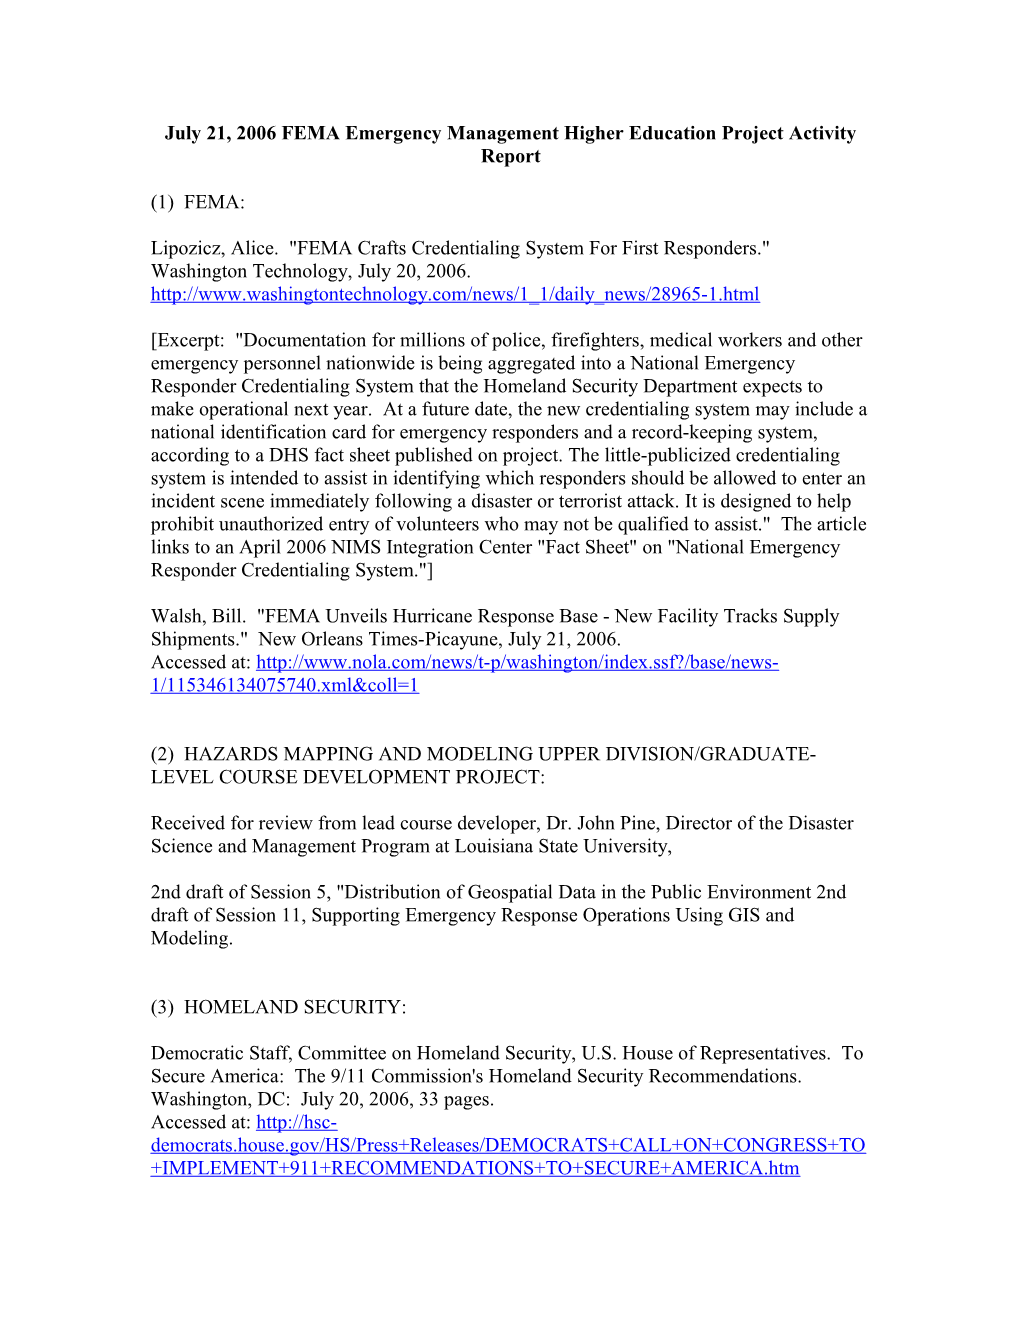 July 21, 2006 FEMA Emergency Management Higher Education Project Activity Report